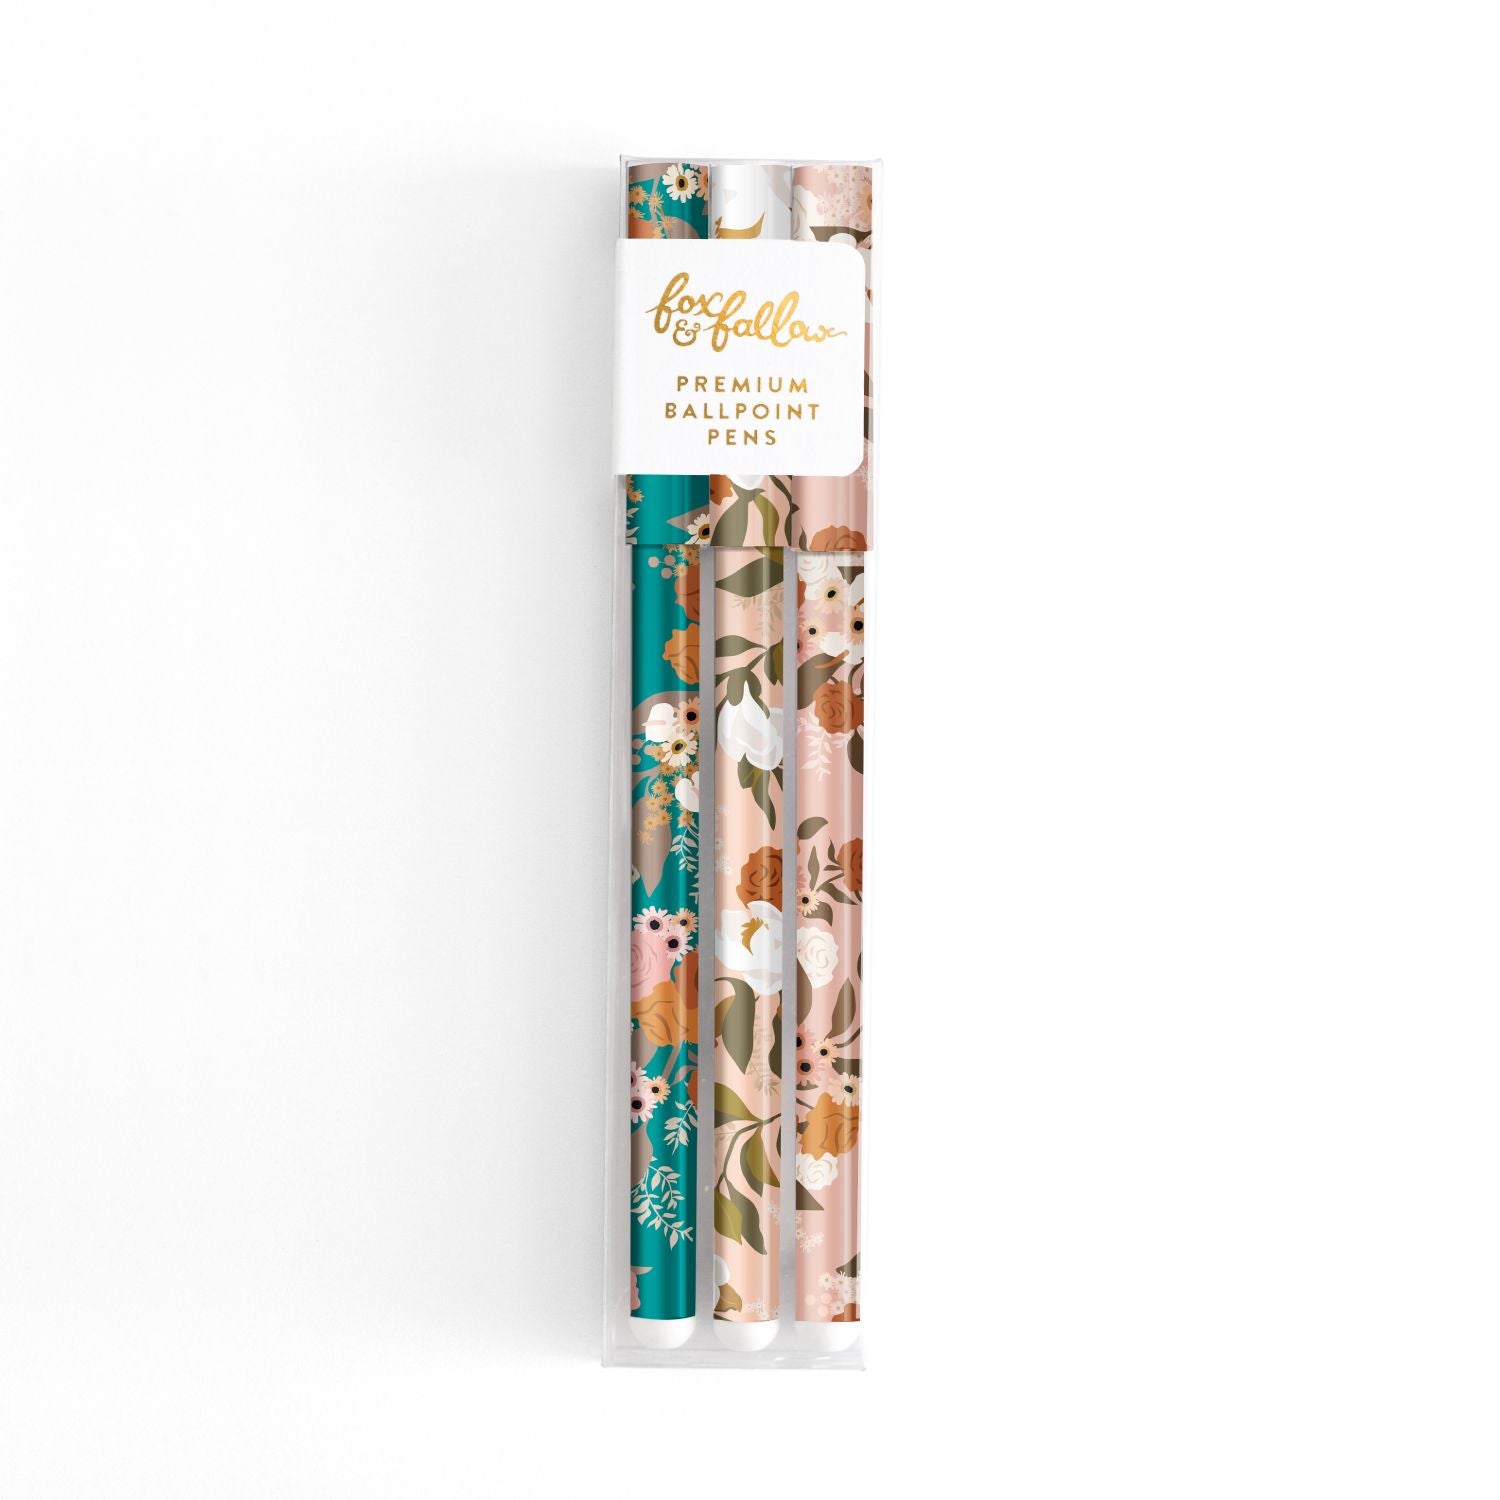 Fox & Fallow Ballpoint Pen Set green and peach with flowers